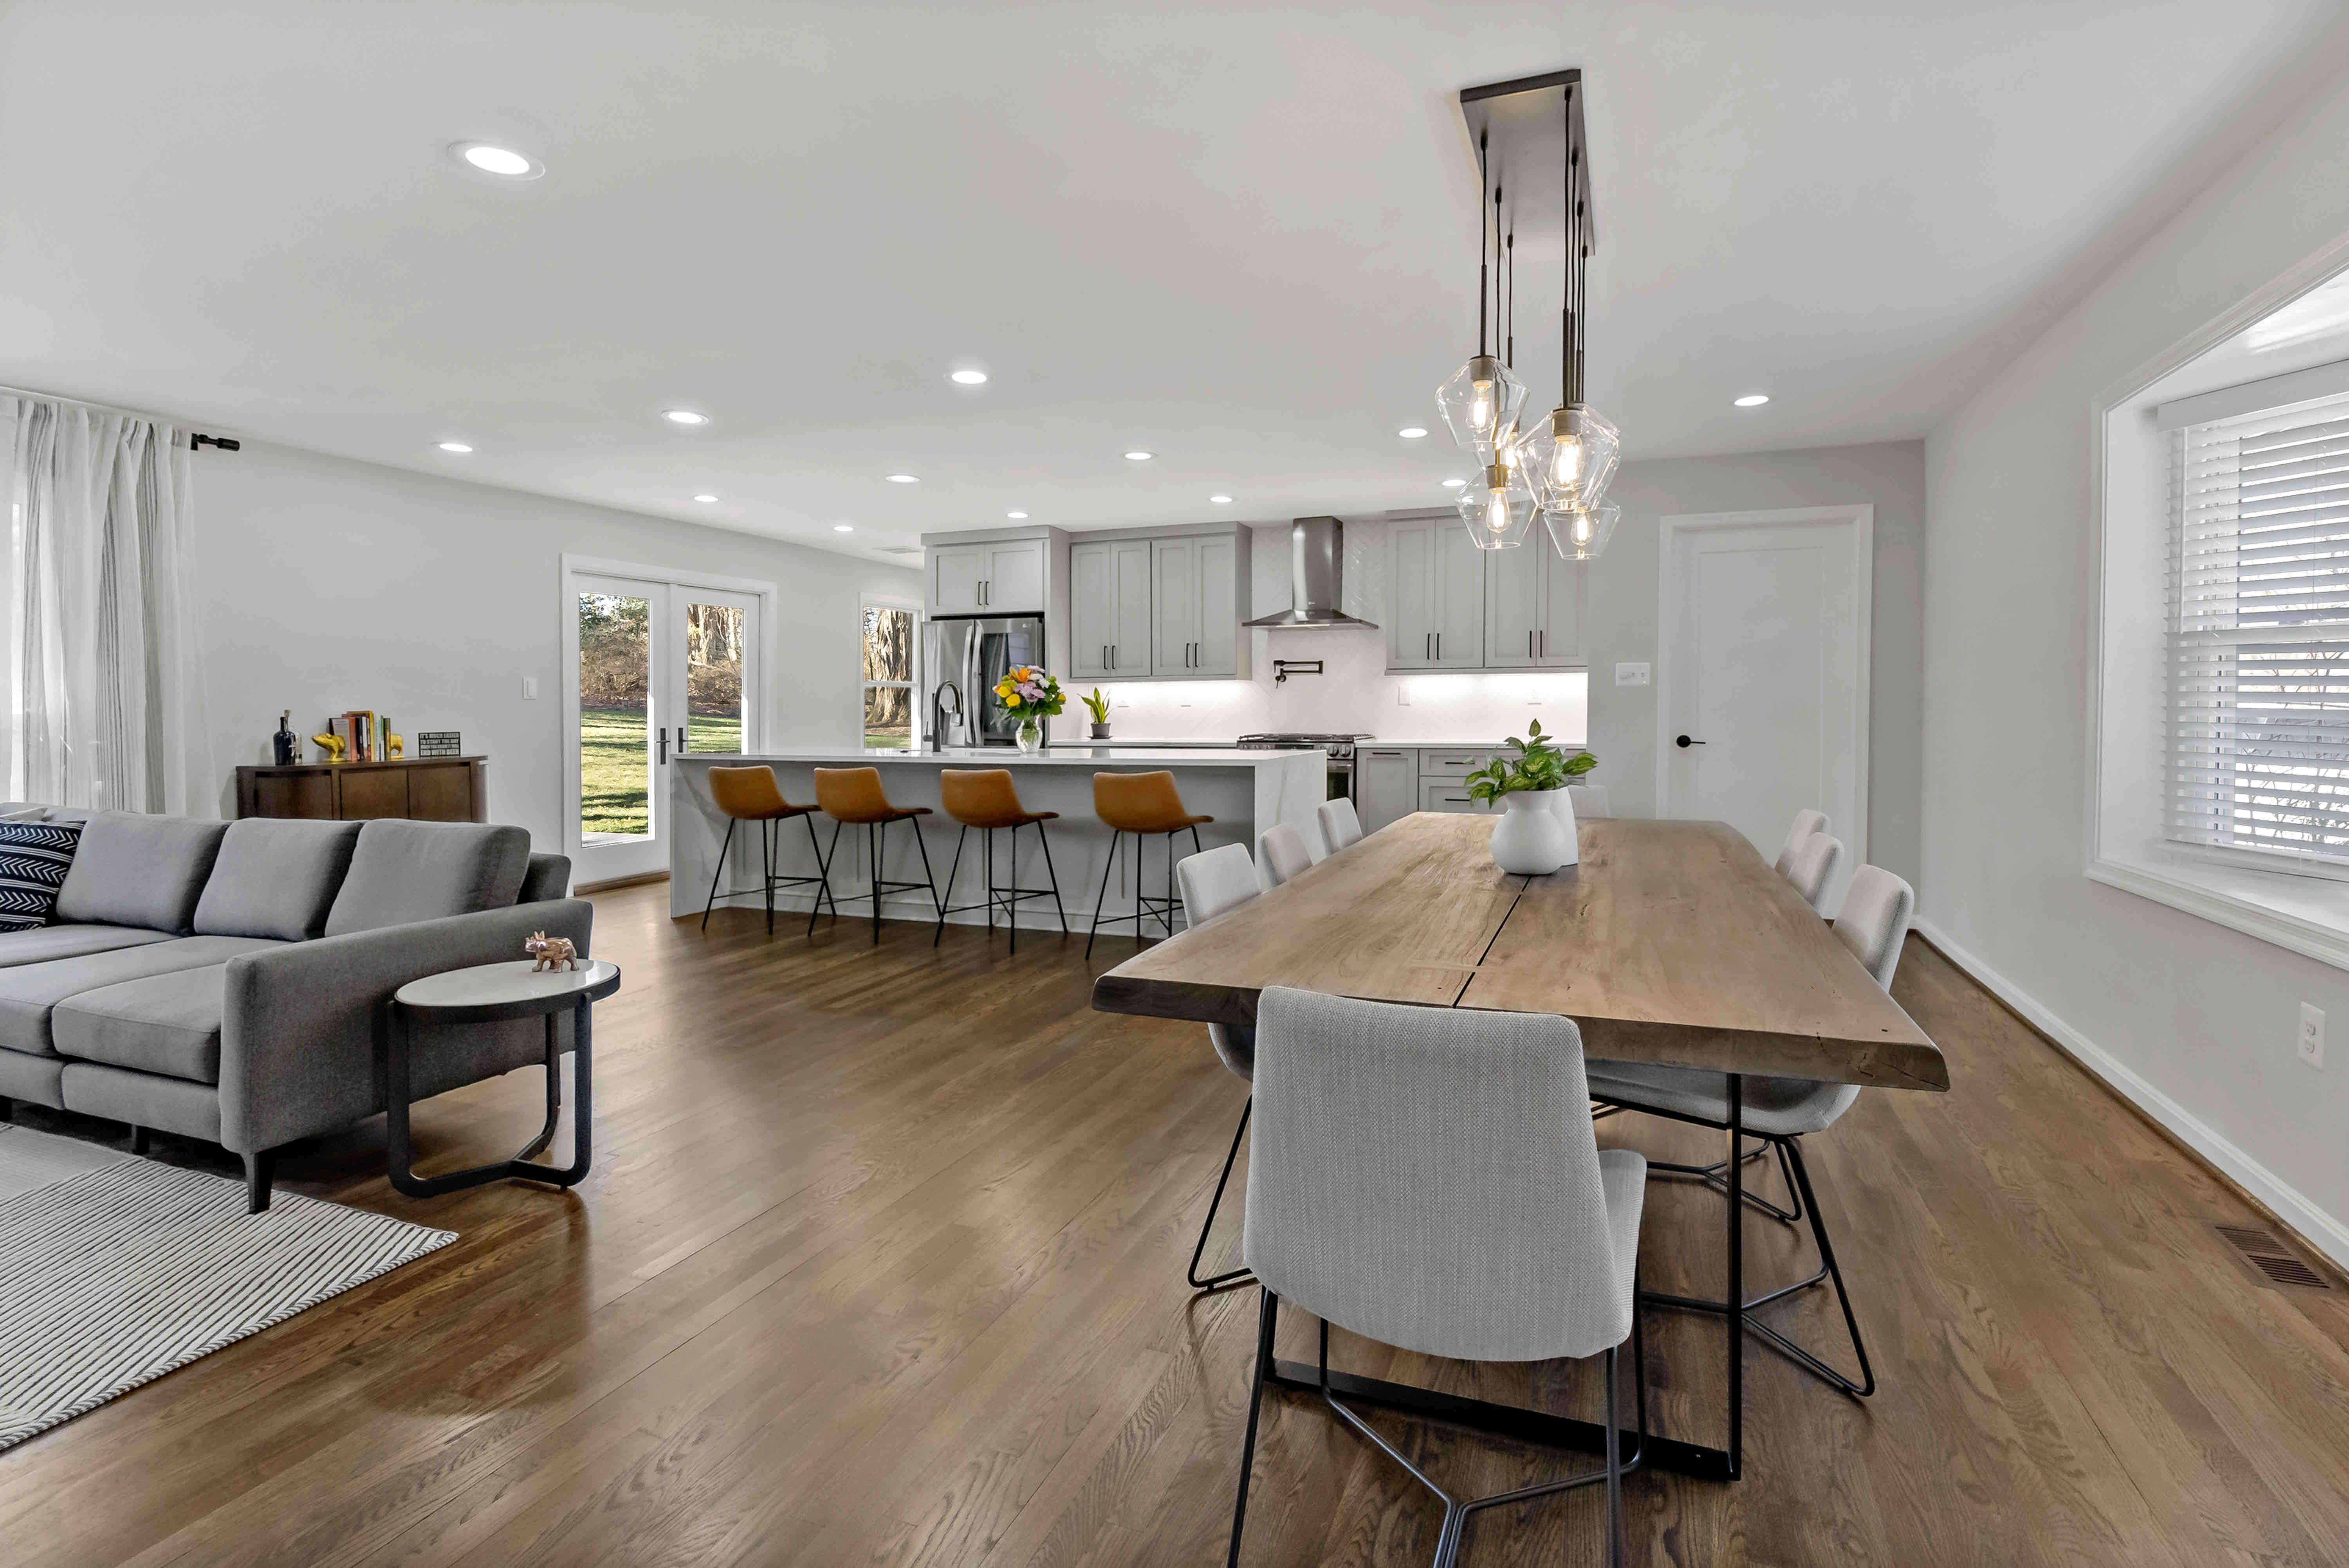 Open concept kitchen space with pendant lighting over dining table